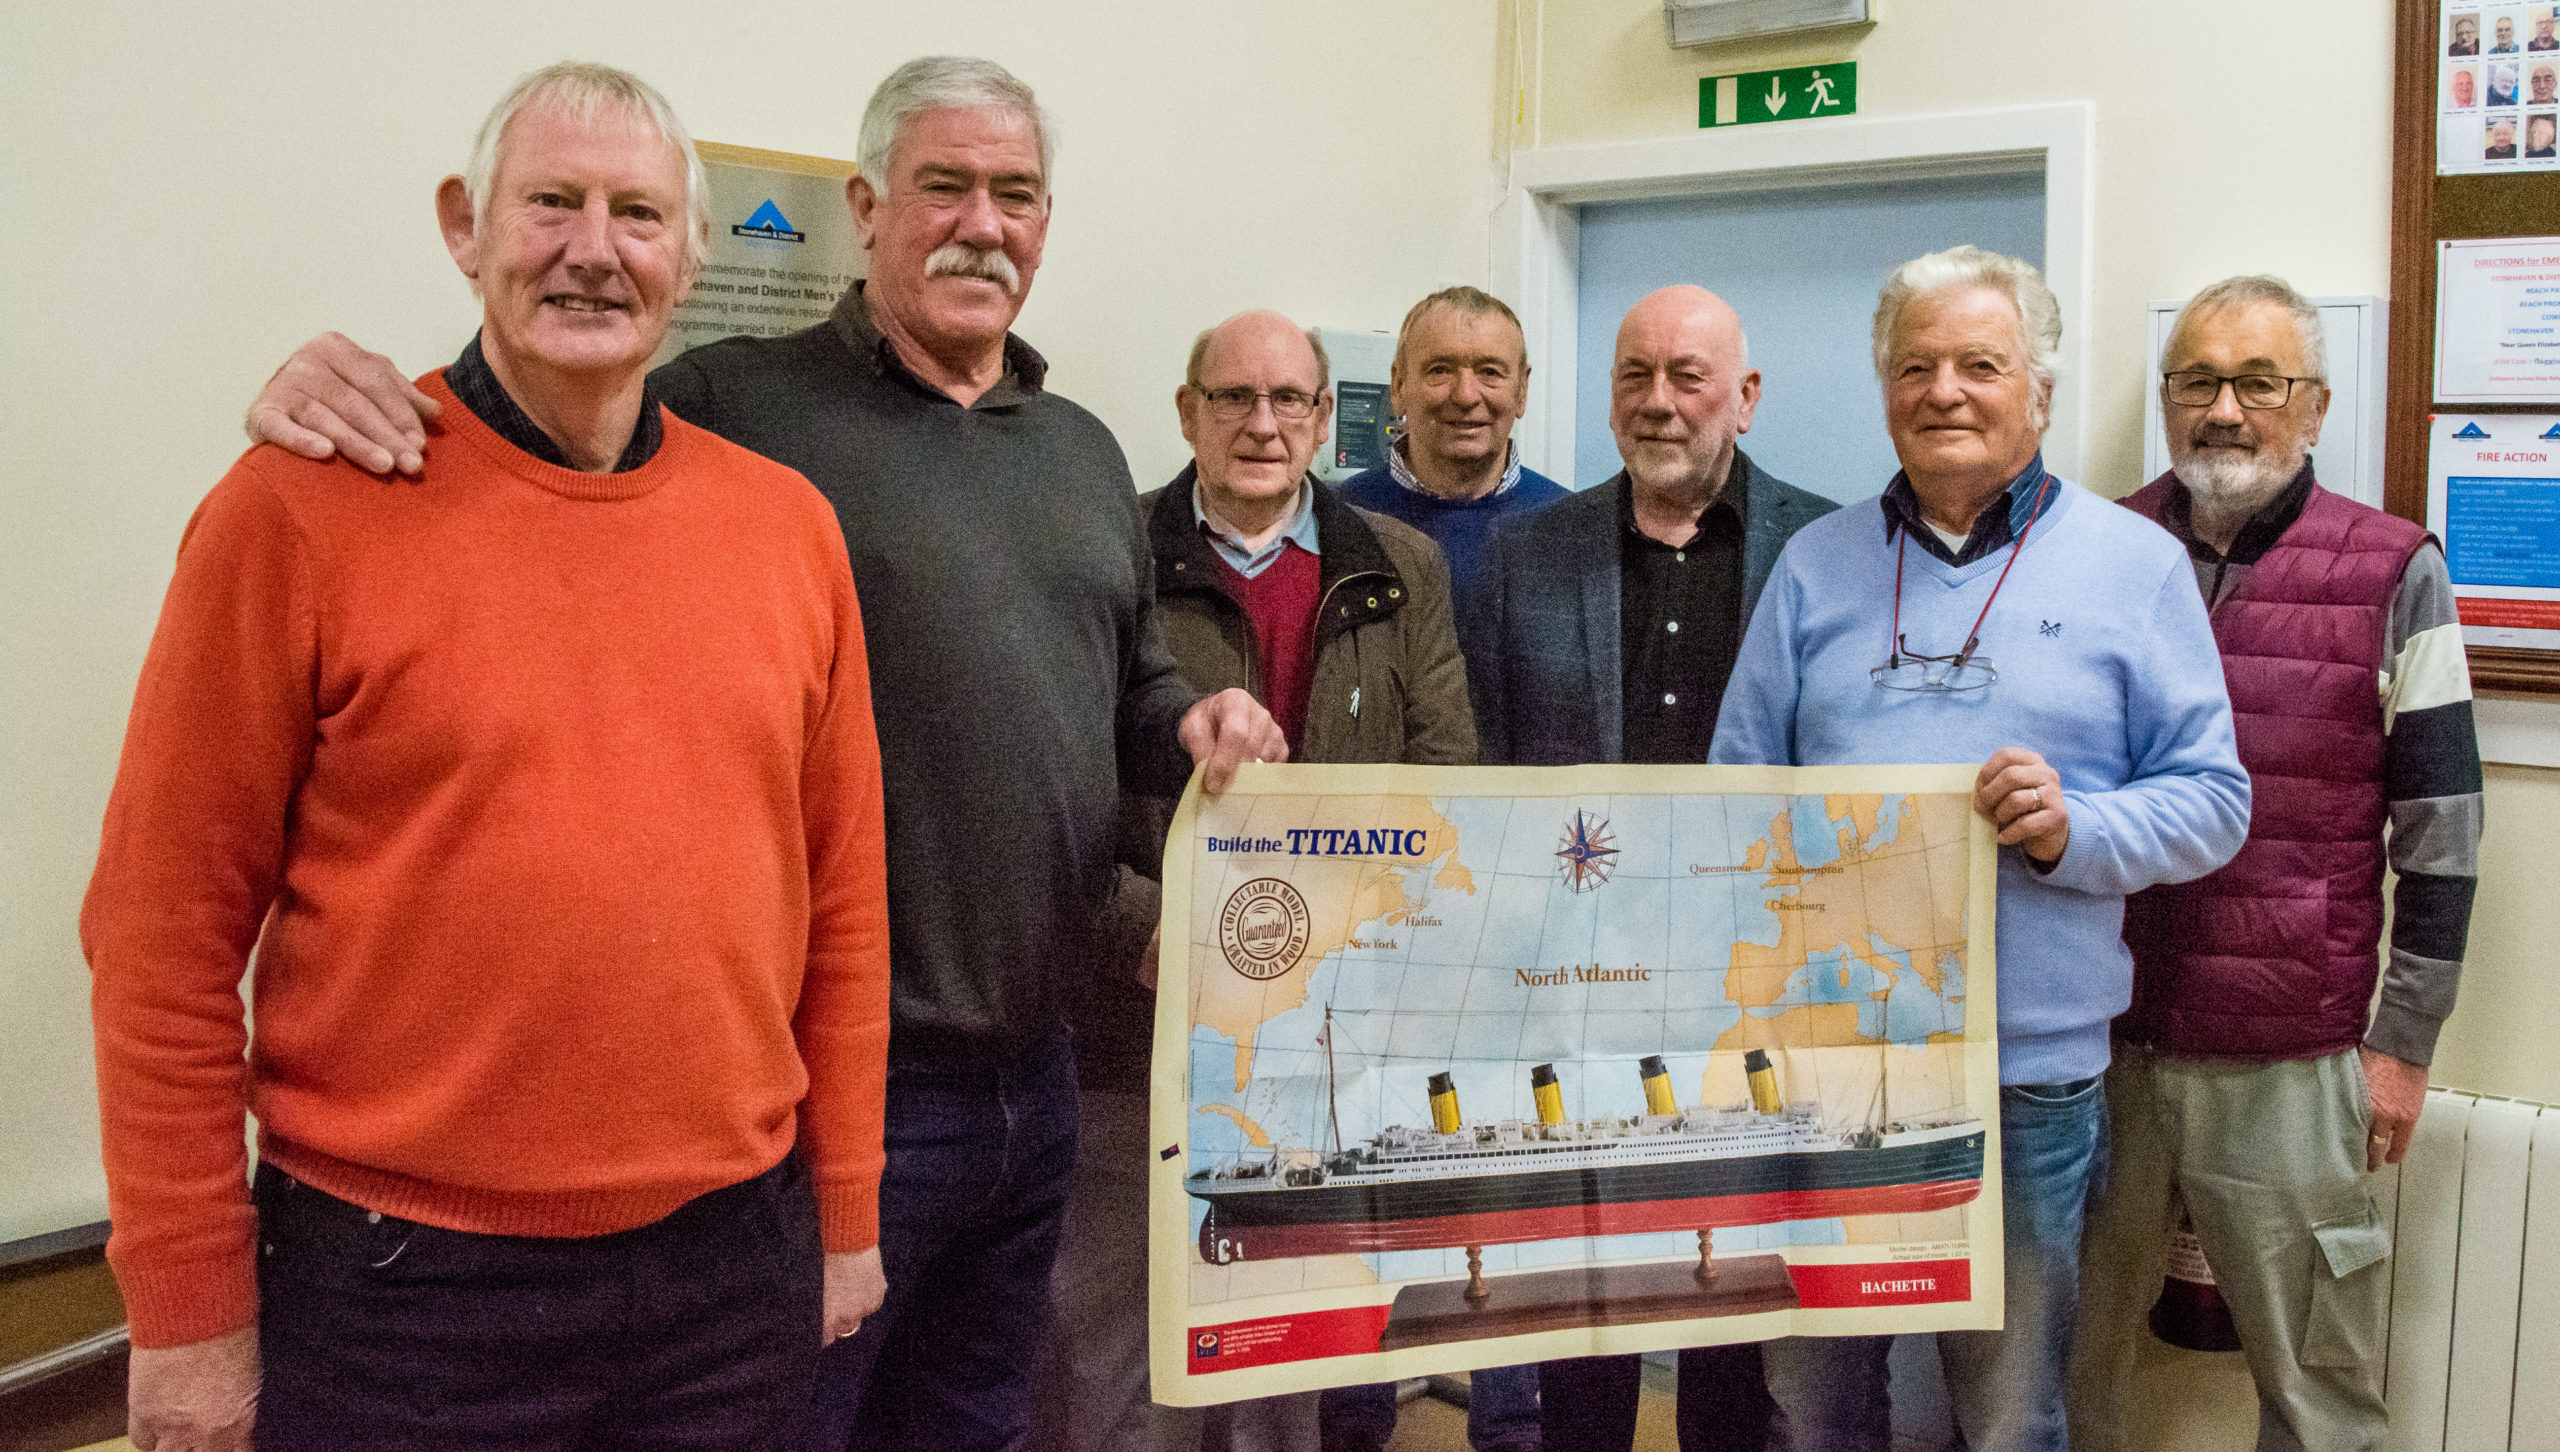 Allan Hay donor of the Titanic kit, middle, Billy Allan Chair, Stonehaven Men's Shed, right, Dave Ramsay, Mearns Heritage Services, along with Men's shed members who will be working on the project.